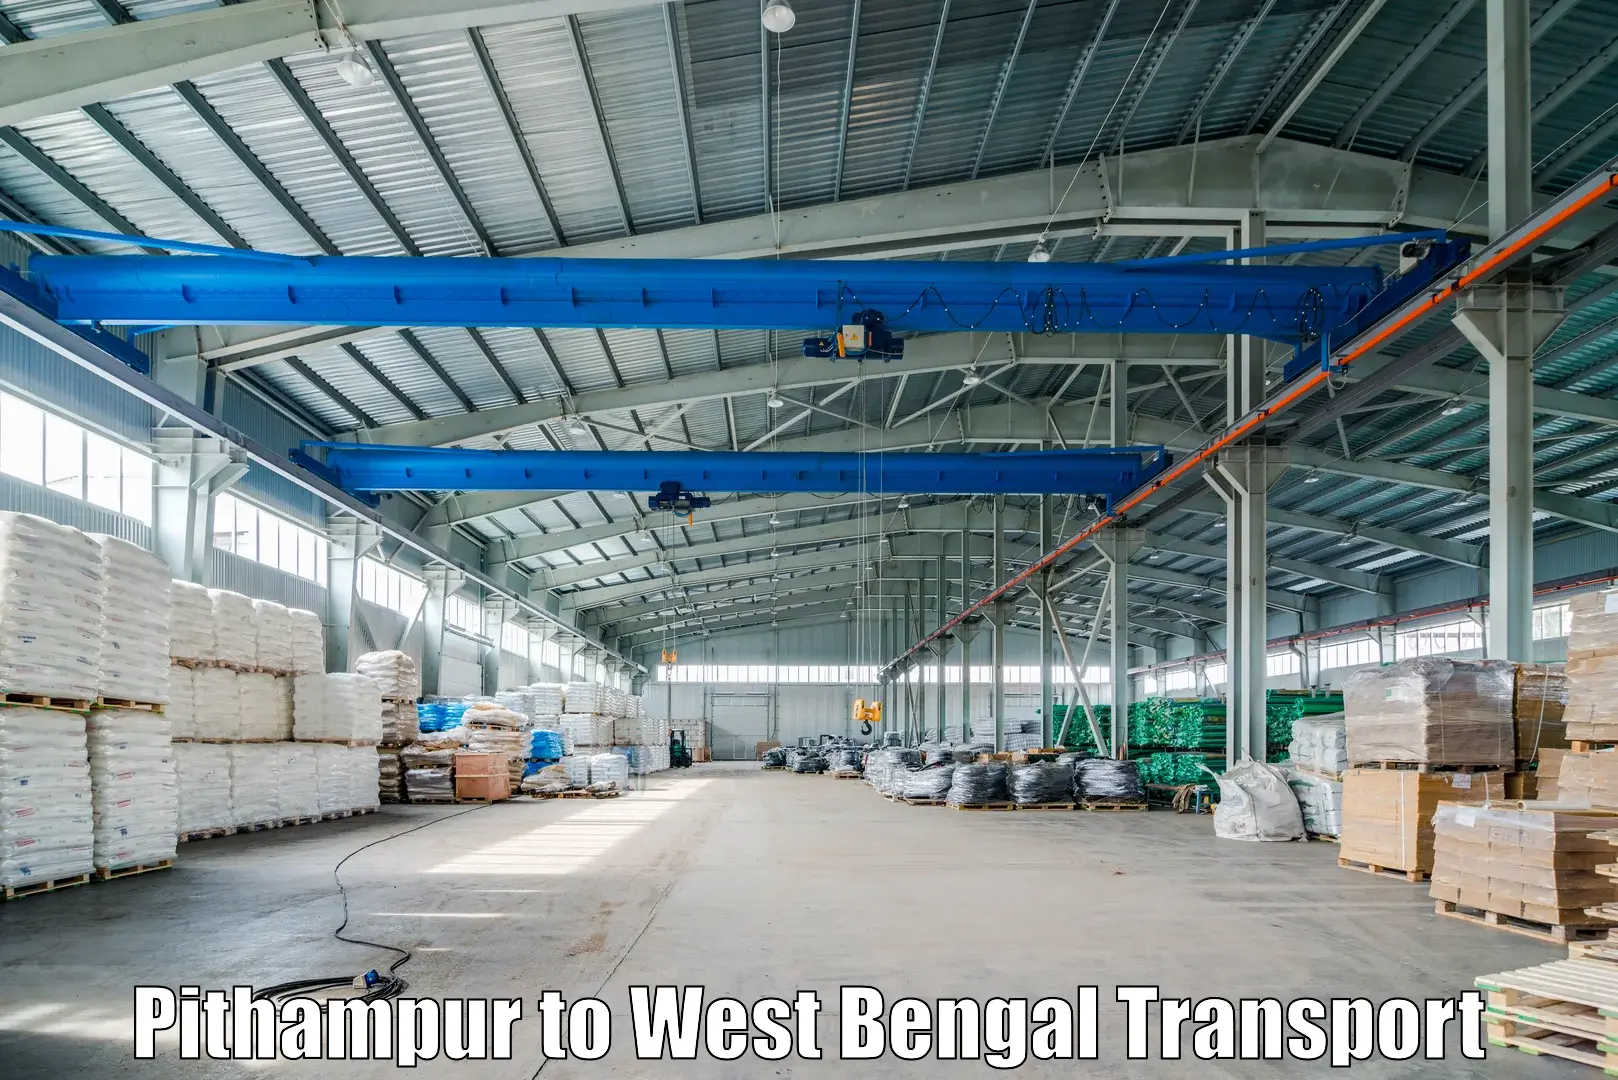 Truck transport companies in India Pithampur to Belda